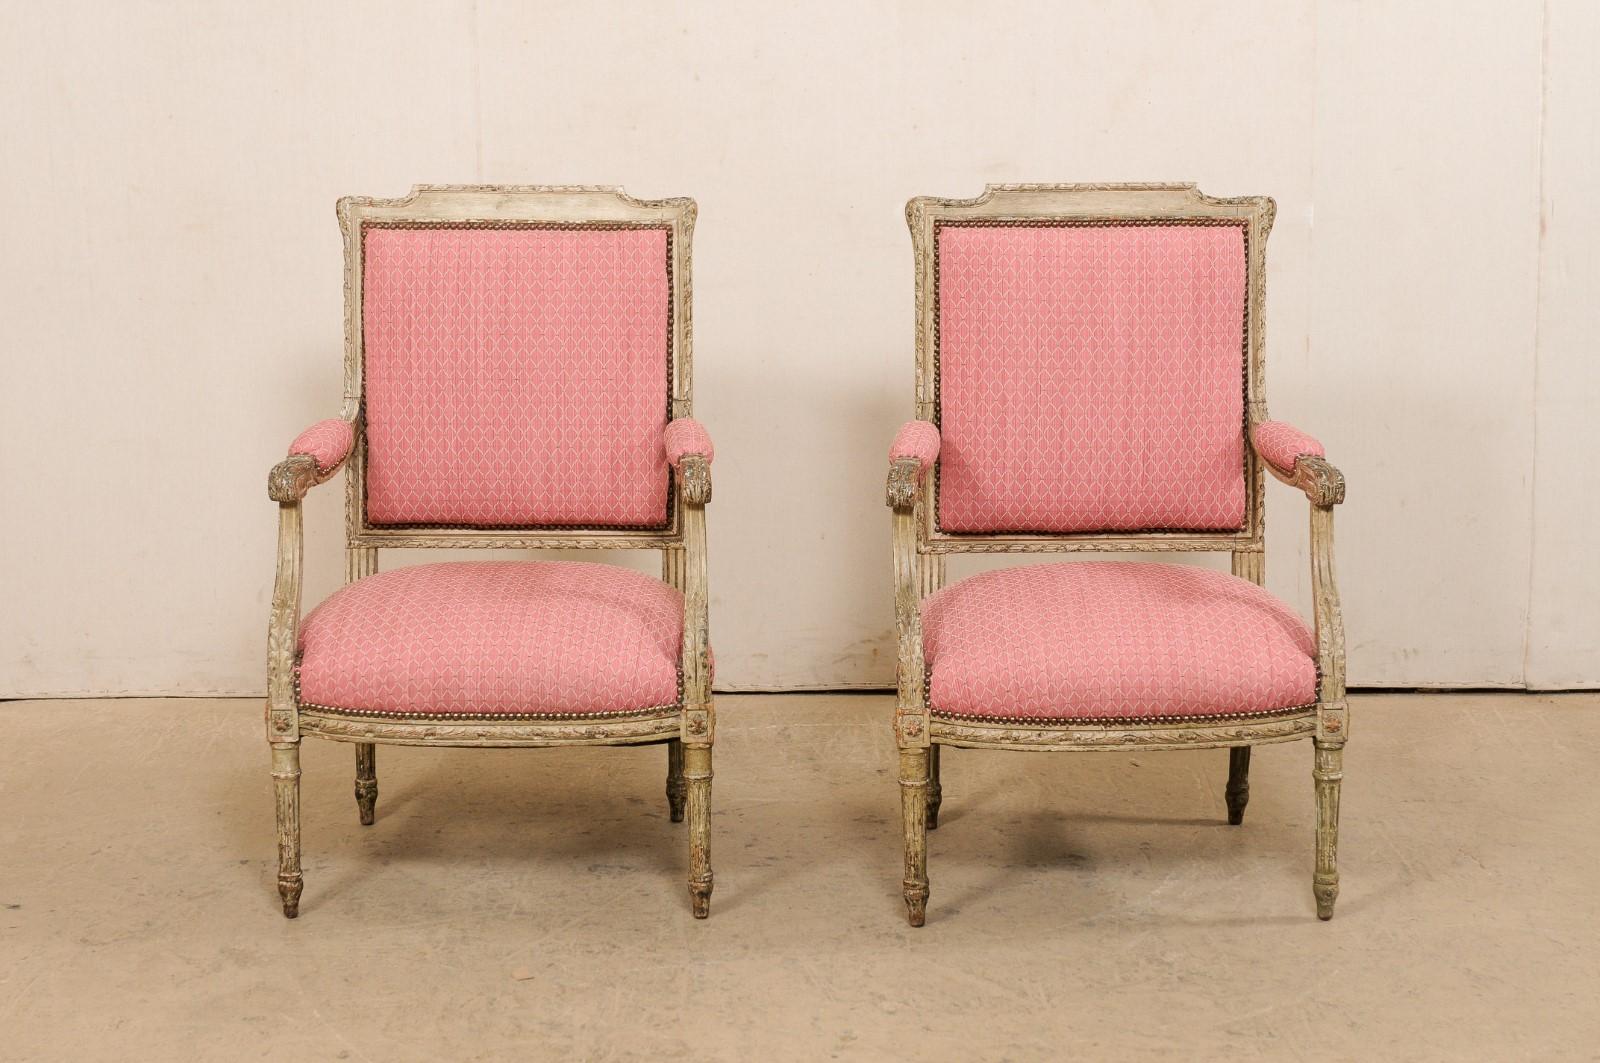 Antique French Pair of Louis XV Style Fauteuil Armchairs w/Original Wood Finish For Sale 7